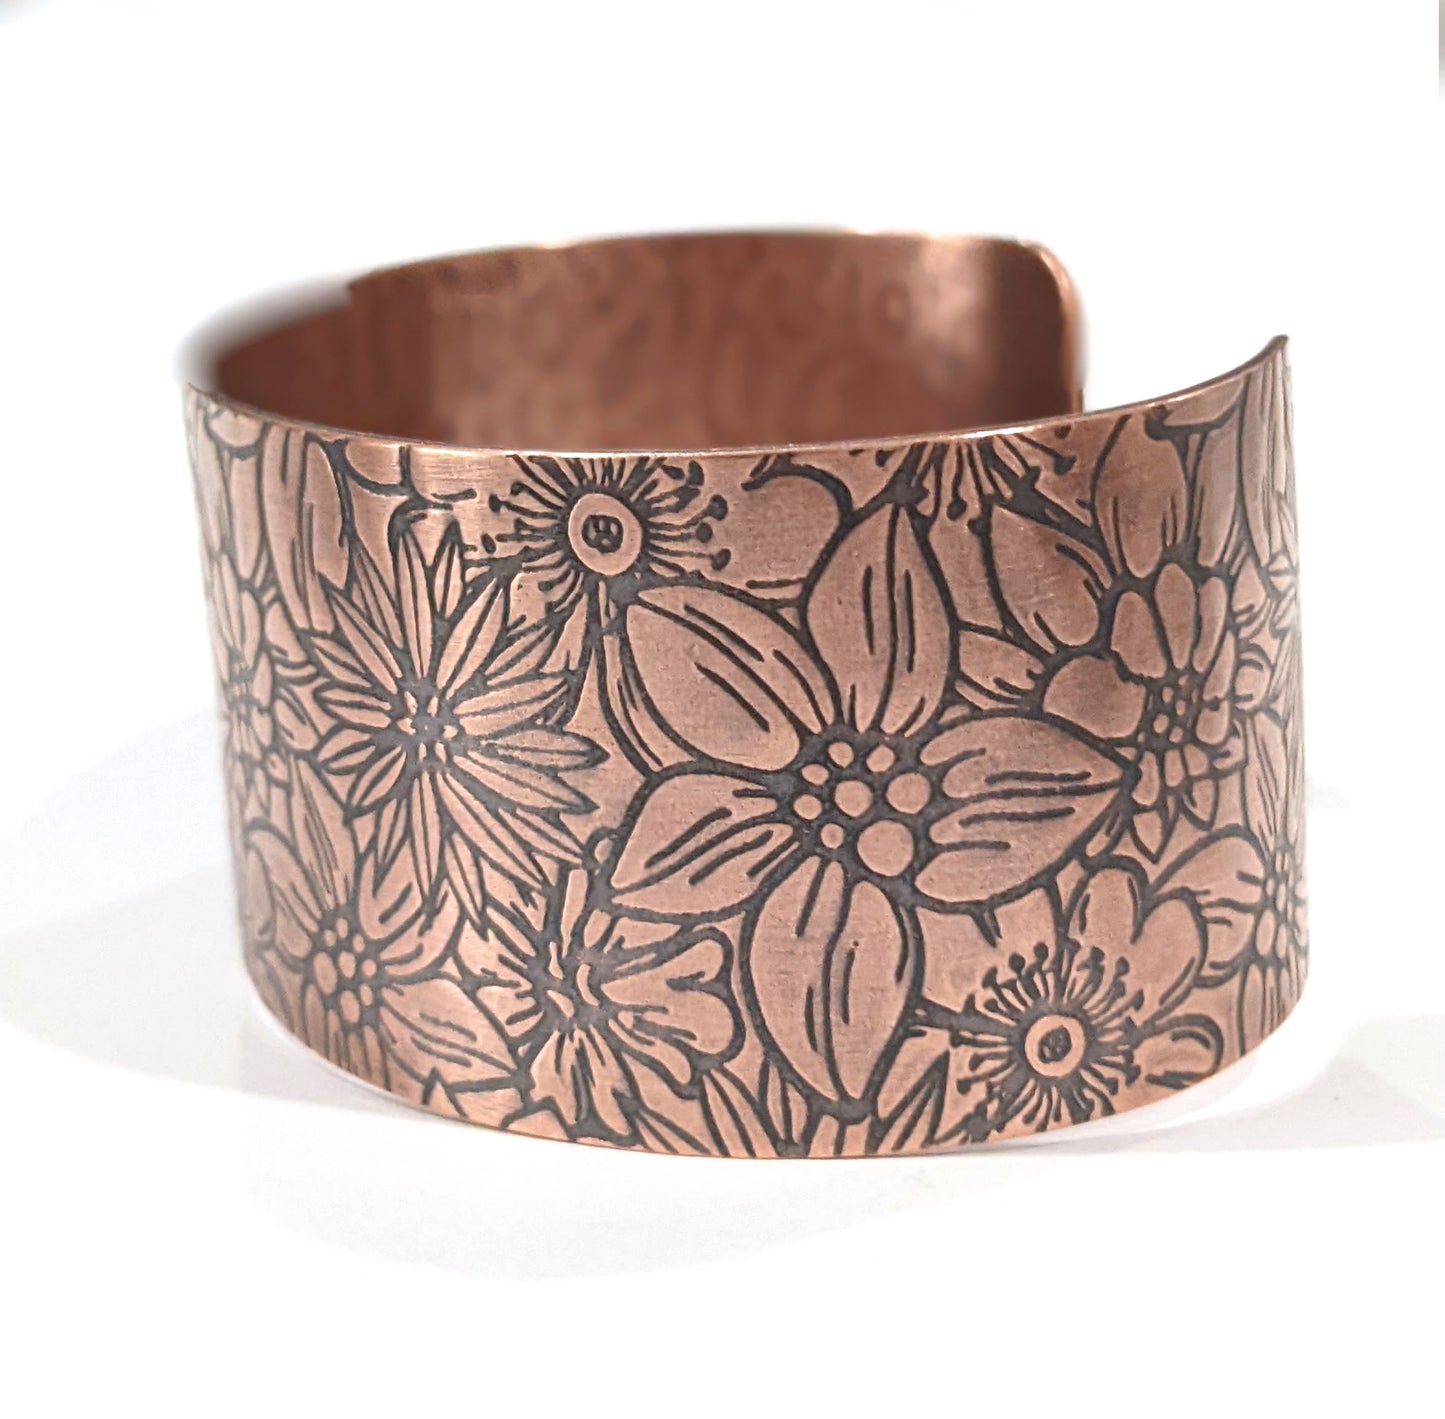 Wide copper bracelet with impressed design of flowers. The entire cuff is covered in various kinds of flowers in full bloom. Side View